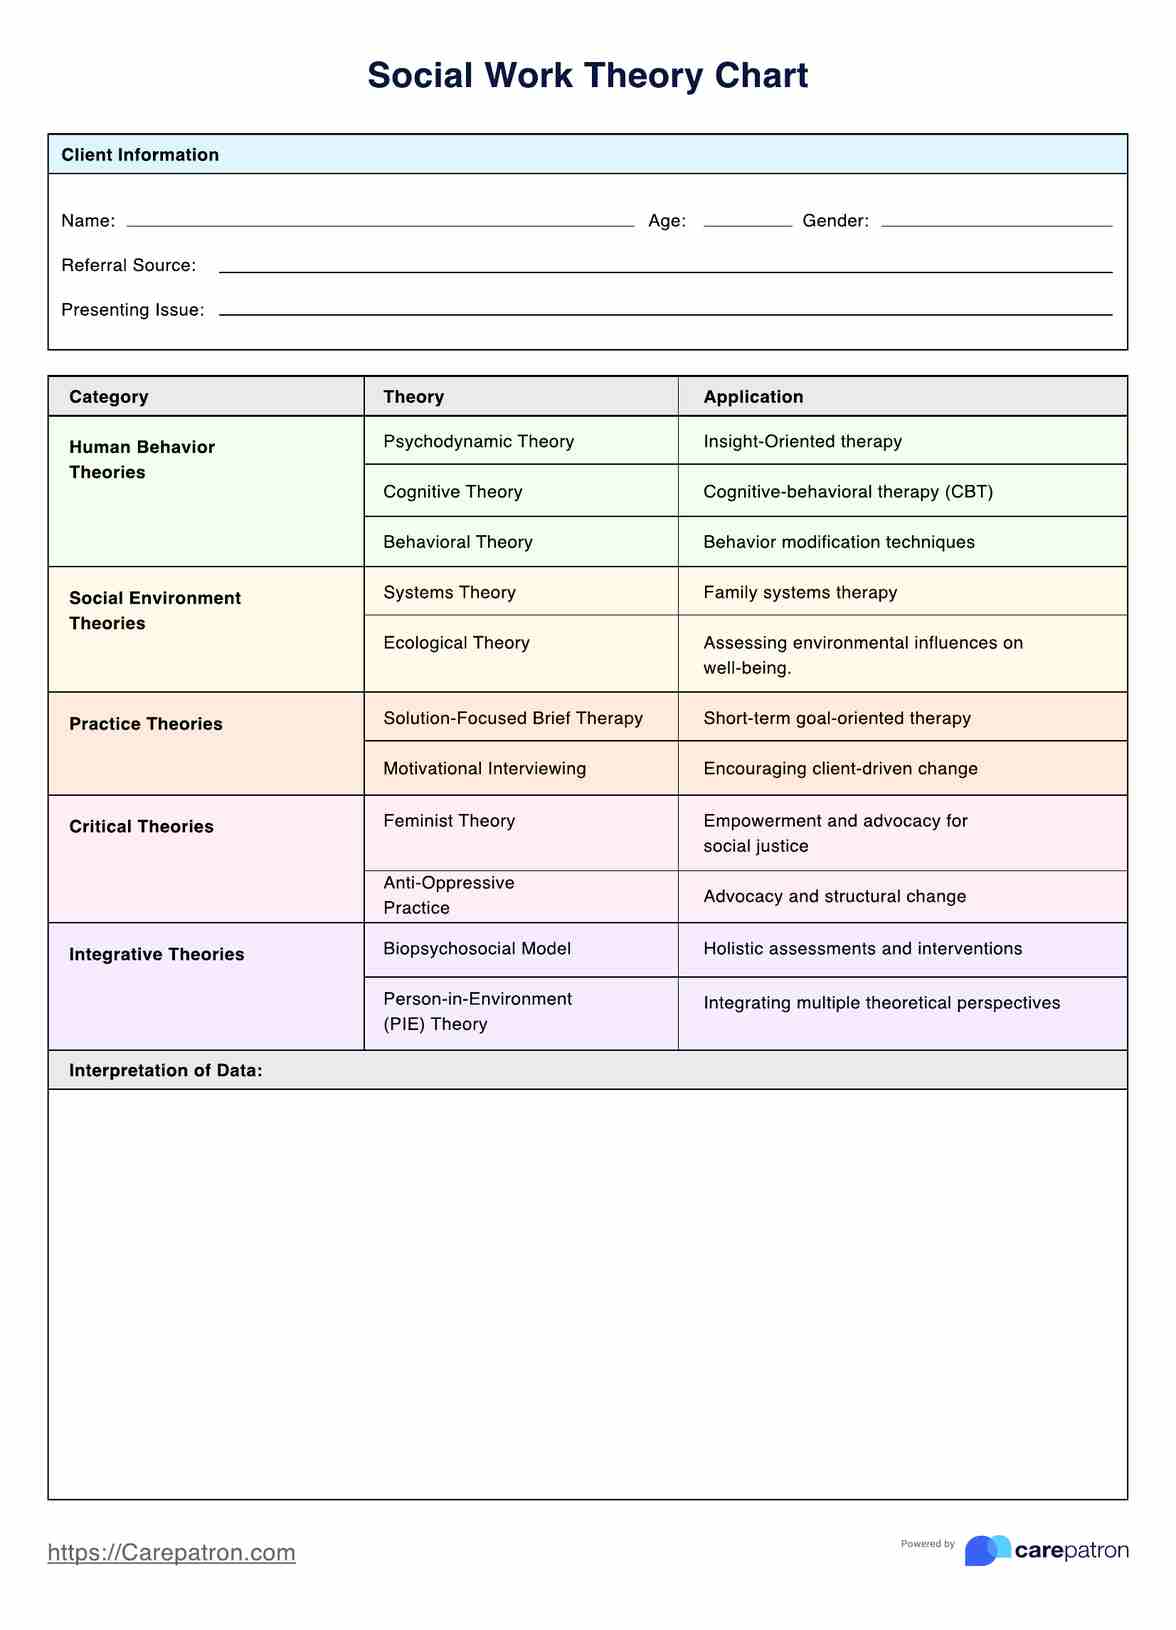 Social Work Theory Chart PDF Example